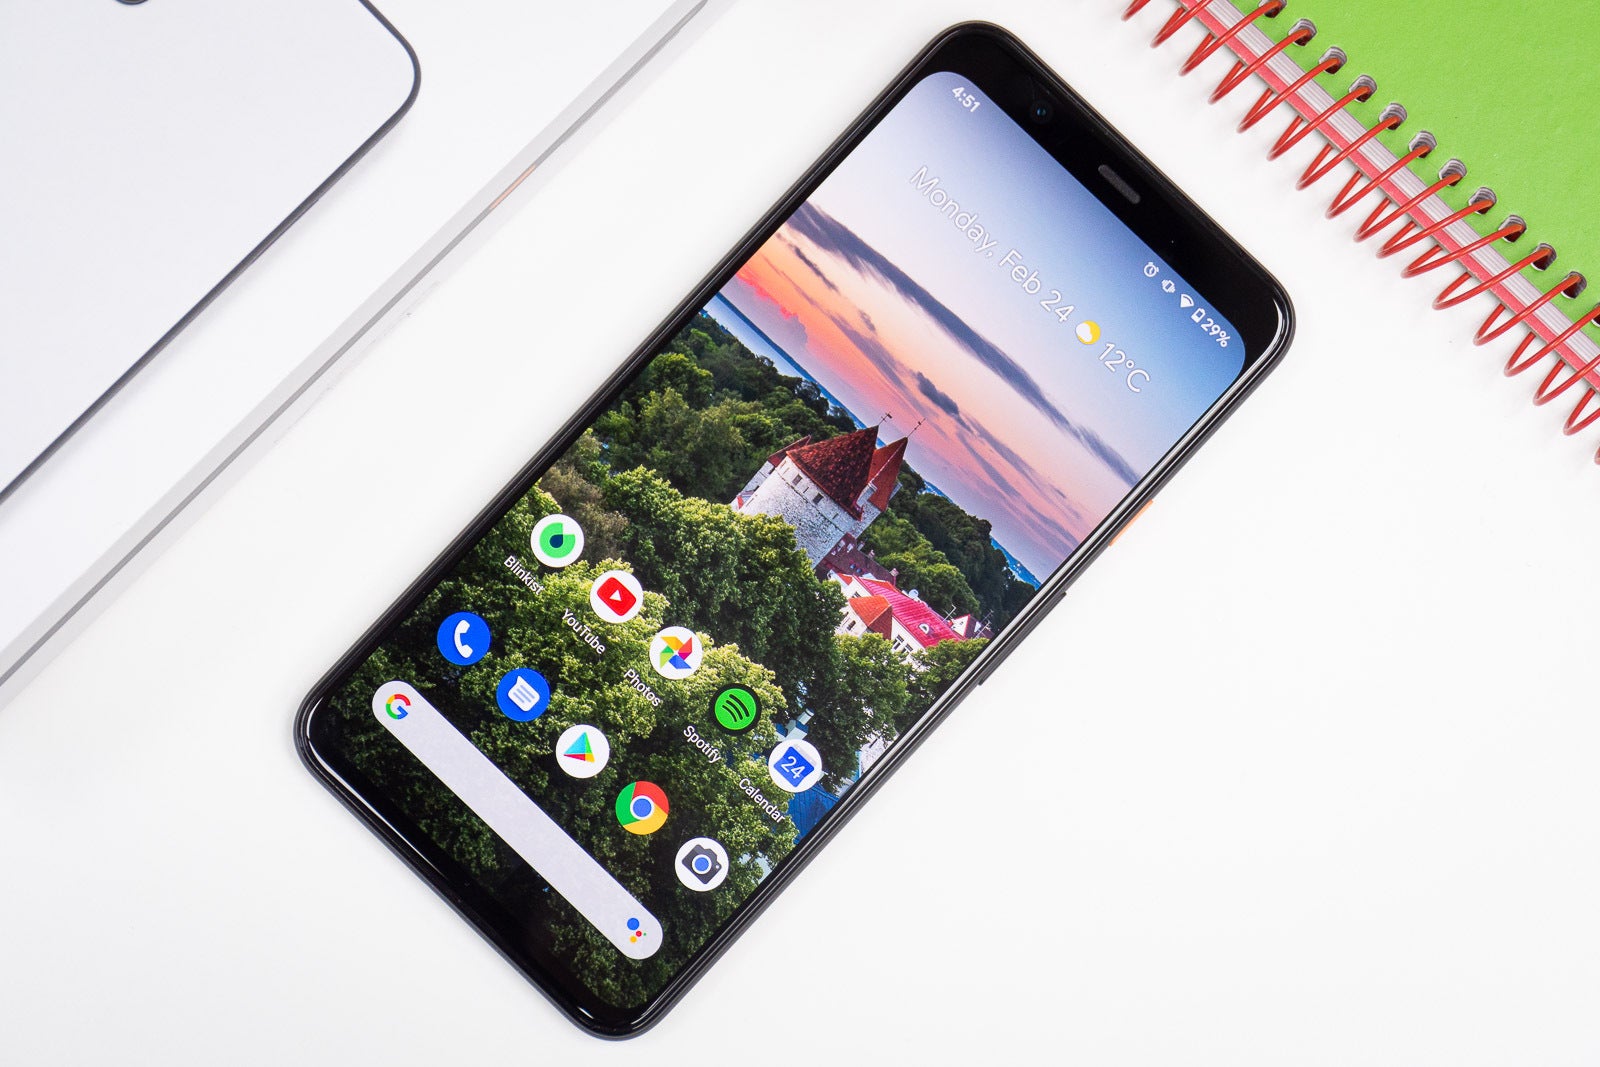 The display on the Google Pixel 4 XL looks gorgeous - Google Pixel 4 XL review 4 months later: is it worth getting one in 2020?